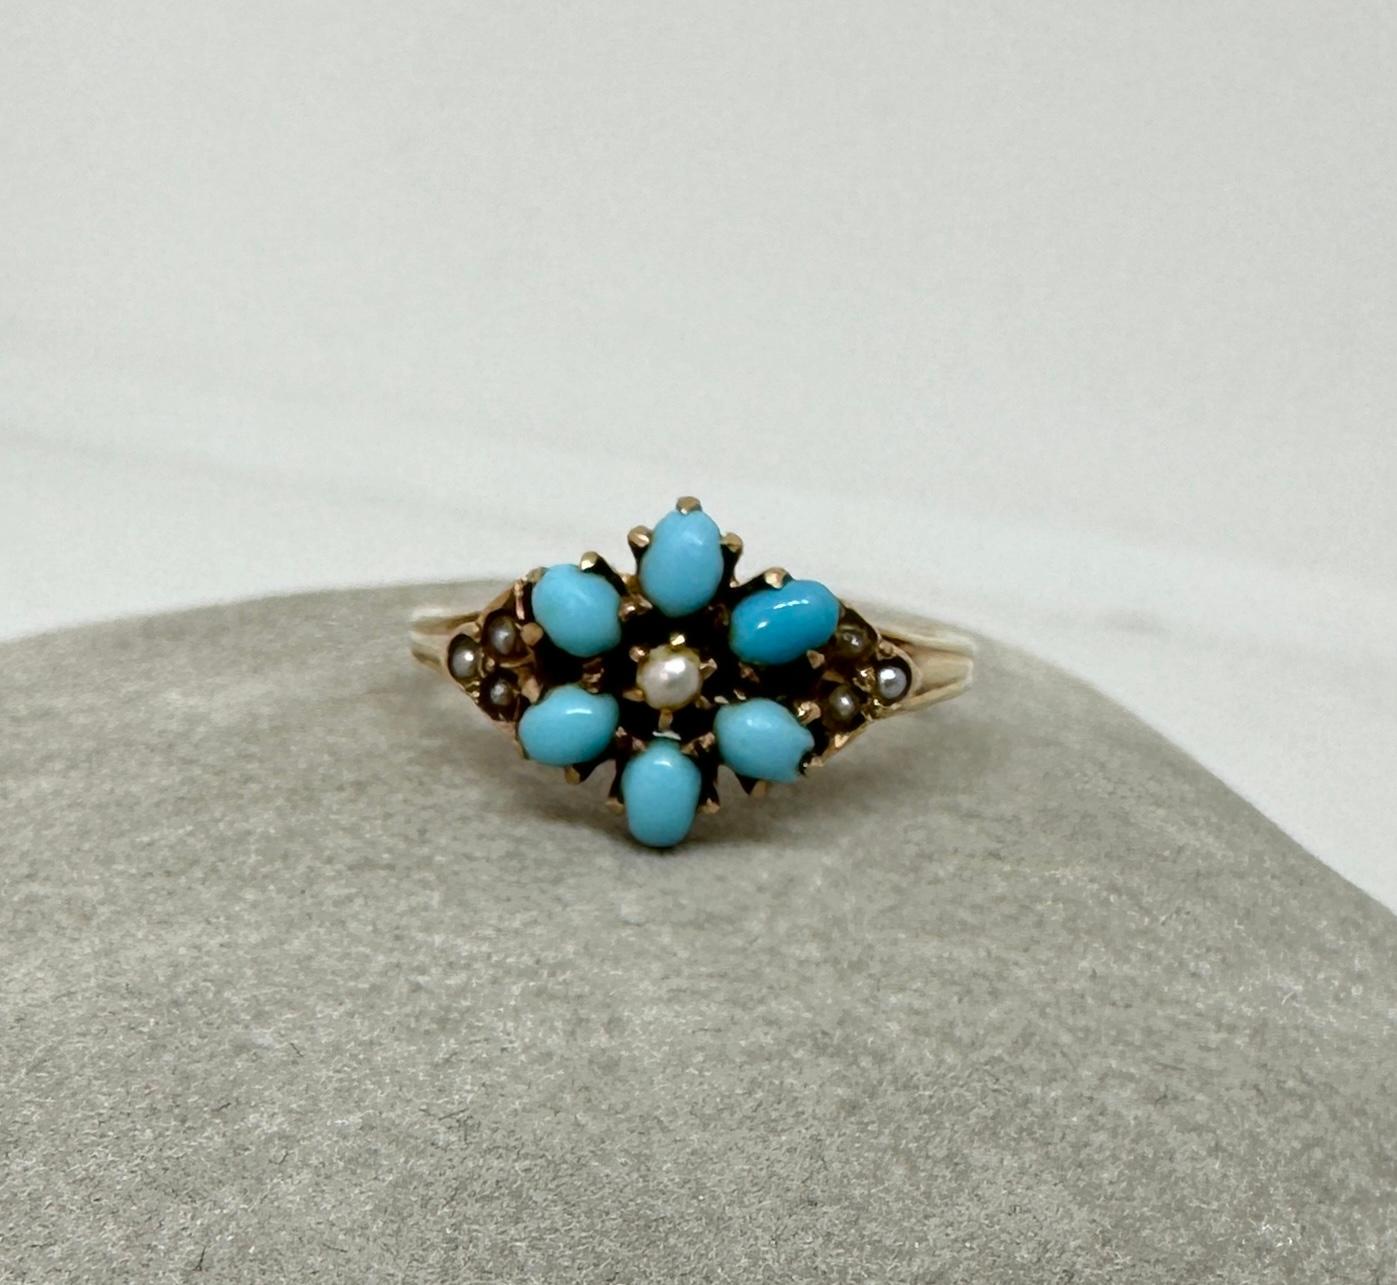 This is a stunning and oh so Romantic Antique Victorian Ring with six Persian Turquoise gems and Pearls in a delicate flower motif. The combination of Pearls and Turquoise in this beautifully made ring is an absolute delight.  There are six Persian